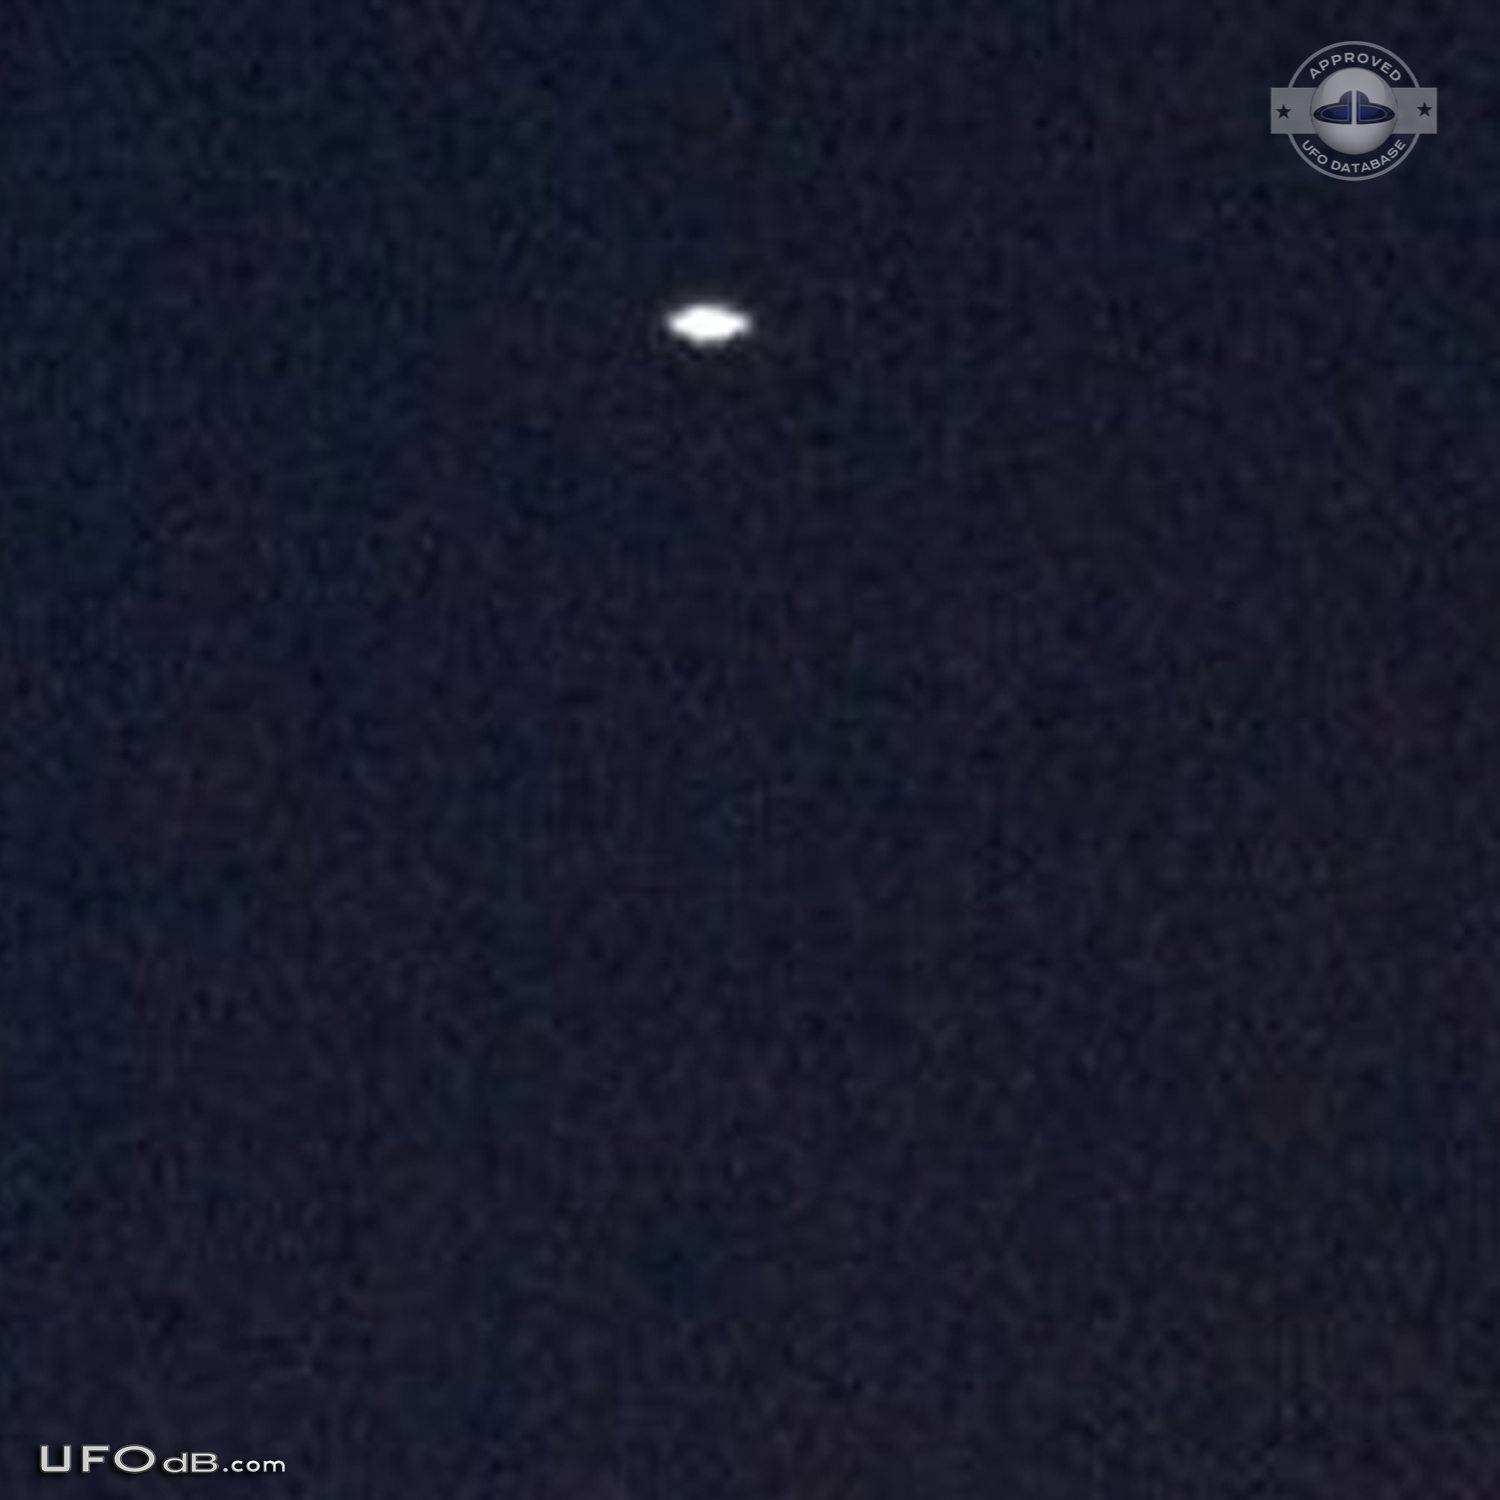 Saucer UFO picture seen over Euless Texas sent to TV station - 2013 UFO Picture #542-2